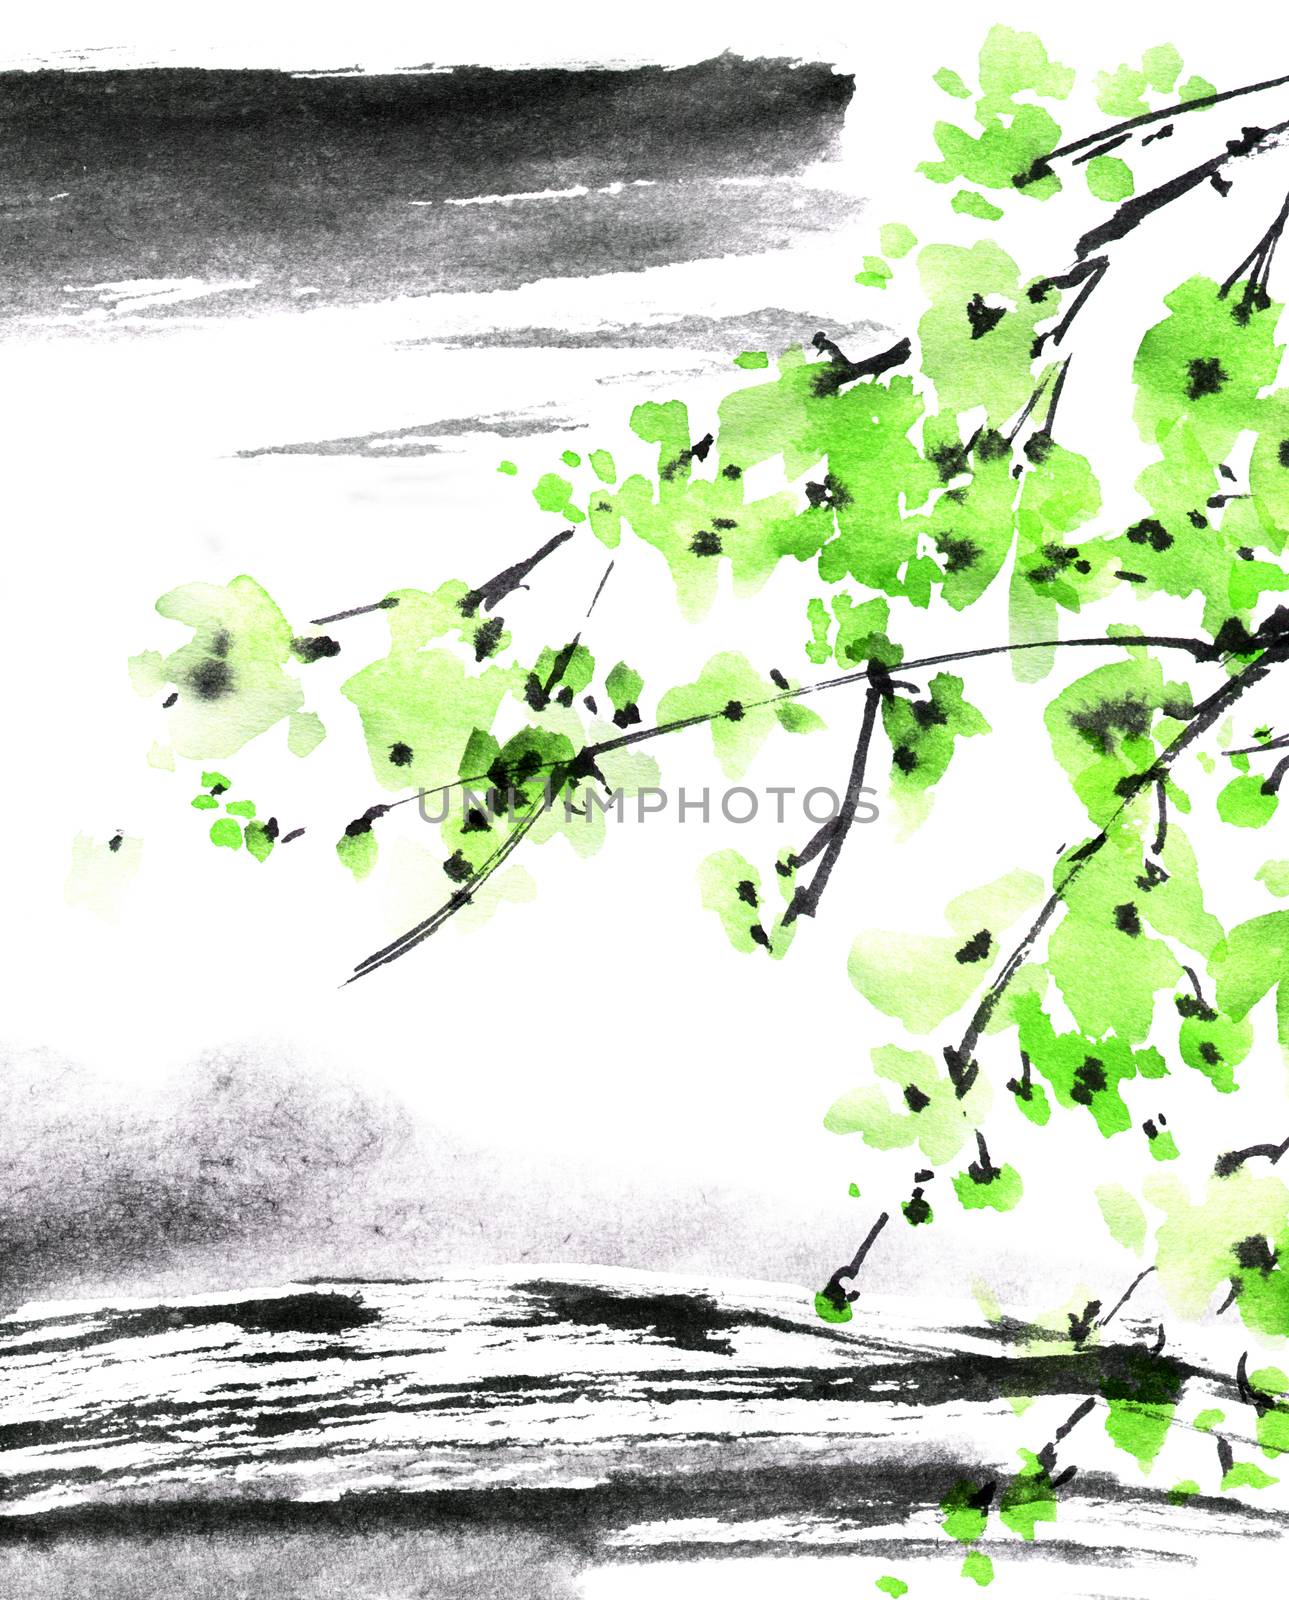 Watercolor and ink illustration of tree with green leaves on abstract landscape background. Oriental traditional painting in style sumi-e, u-sin.